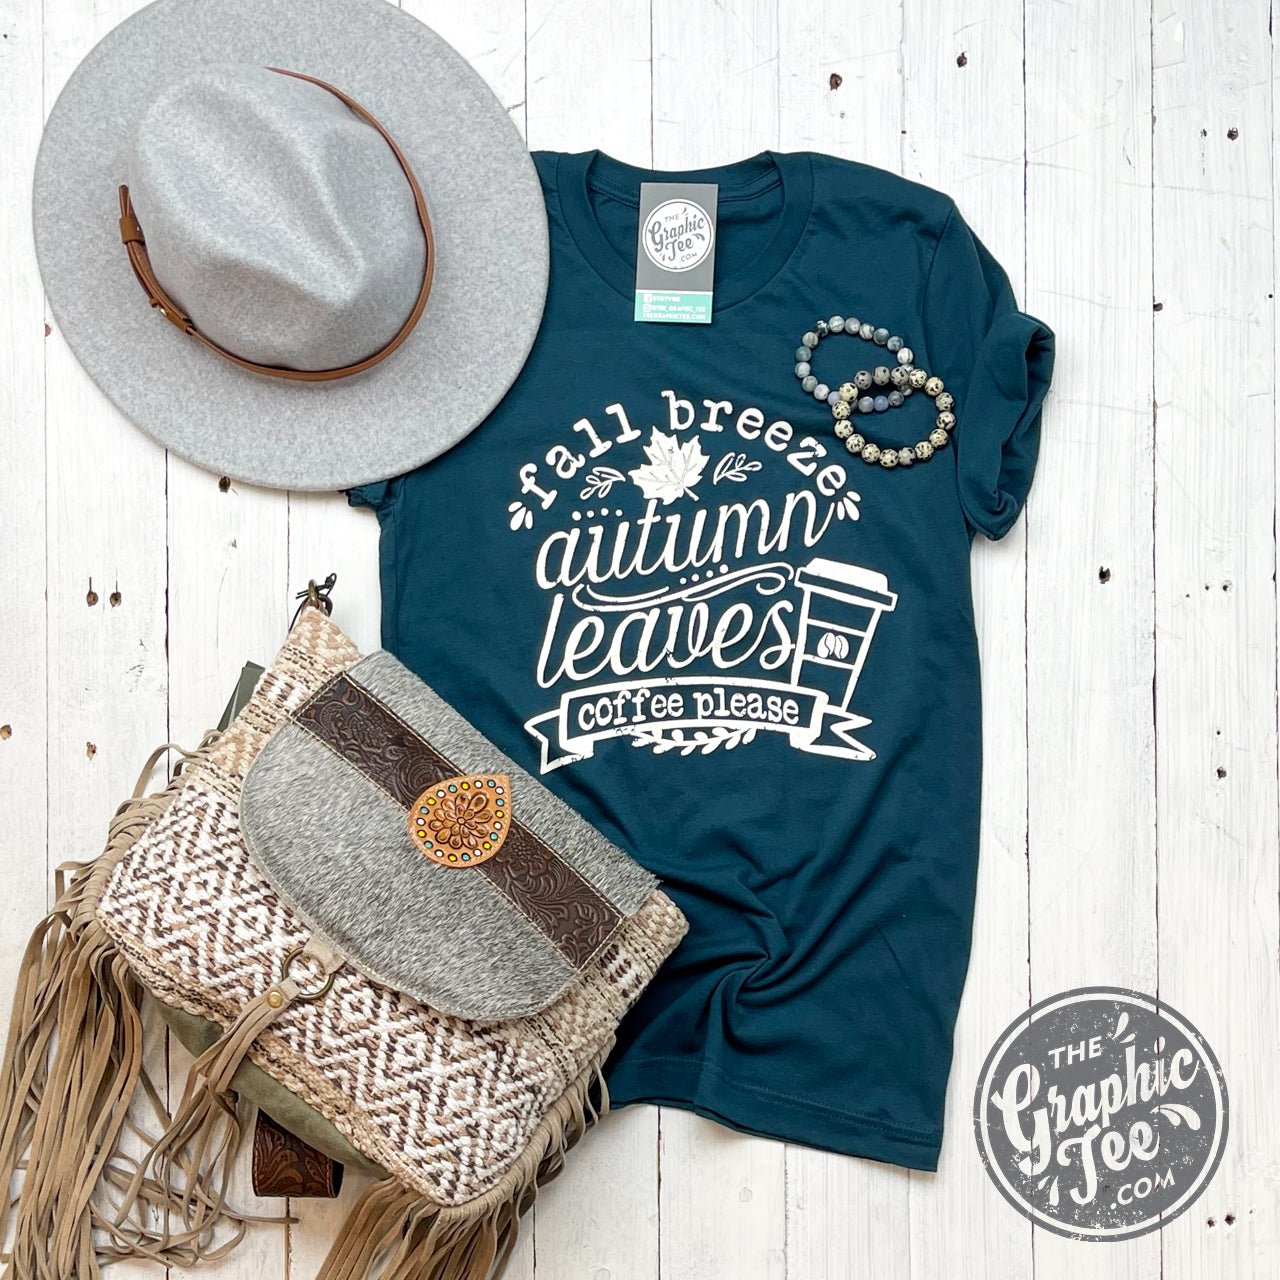 Fall Breeze, Autumn Leaves, Coffee Please Short Sleeve Tee - The Graphic Tee